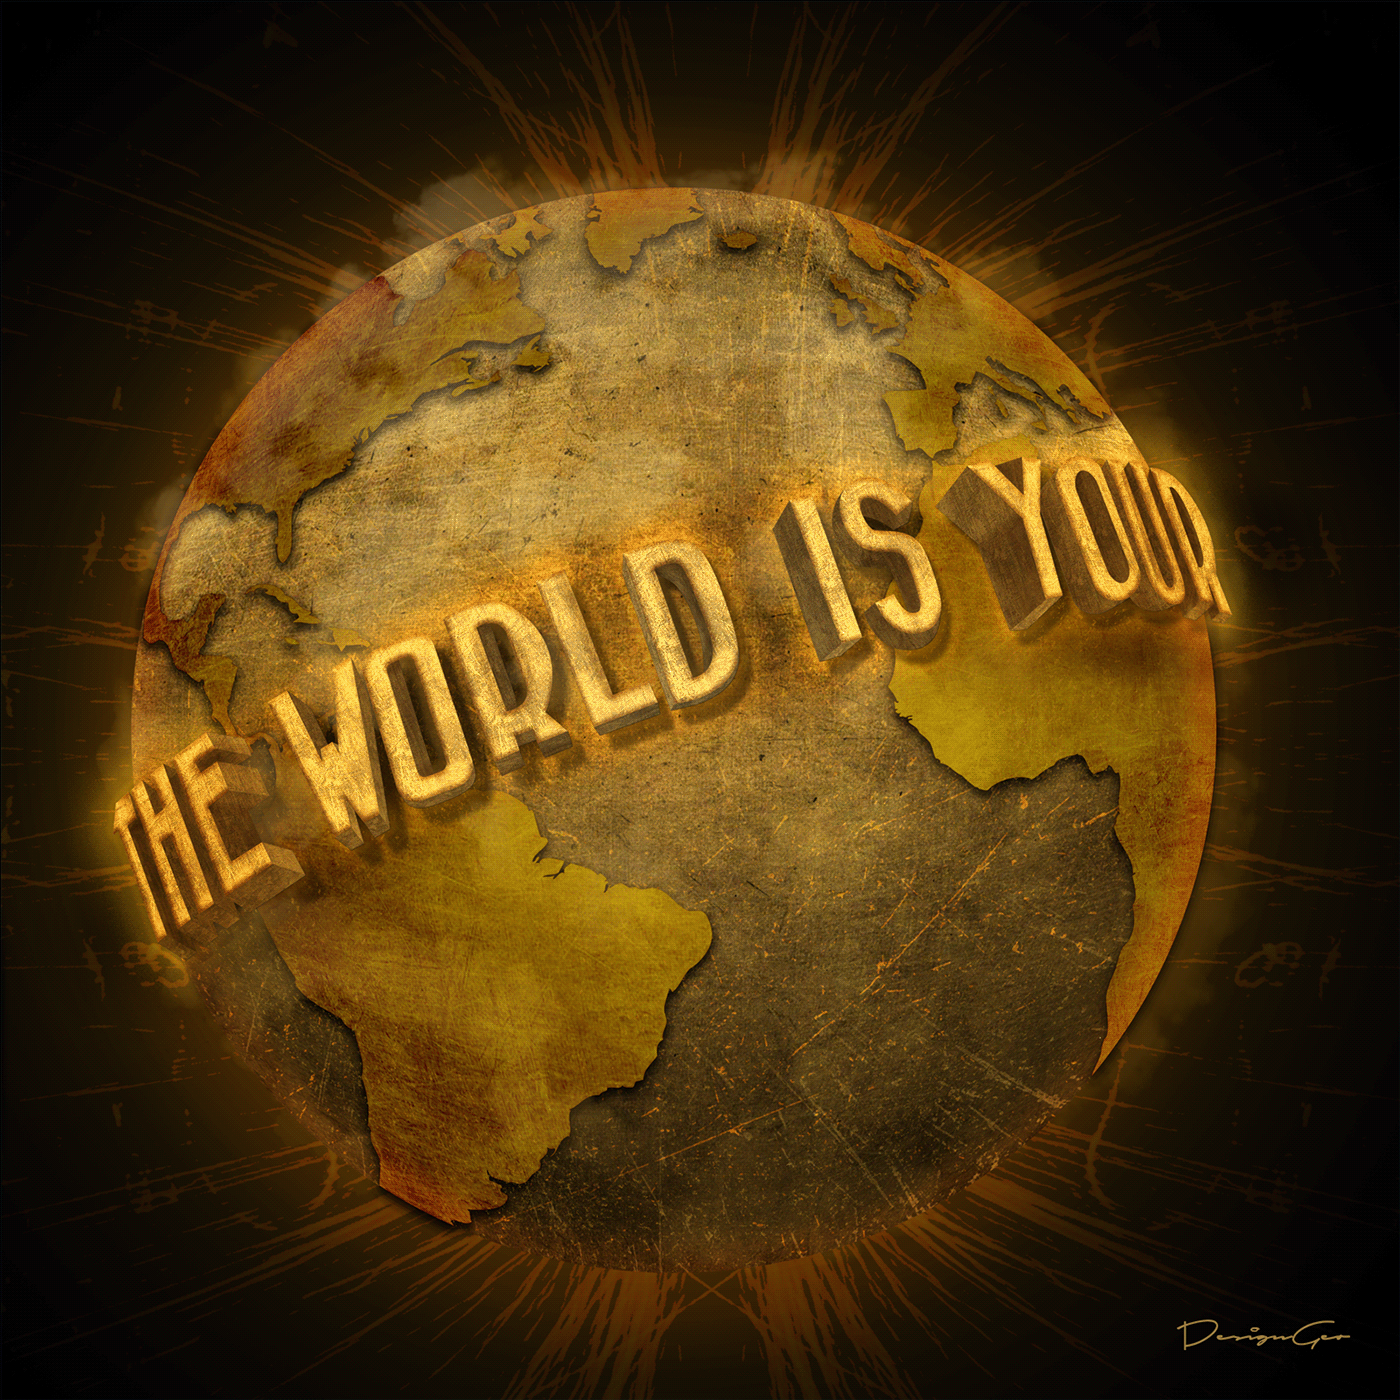 A collection of digital artworks inspired by the quote "The World is Yours" 